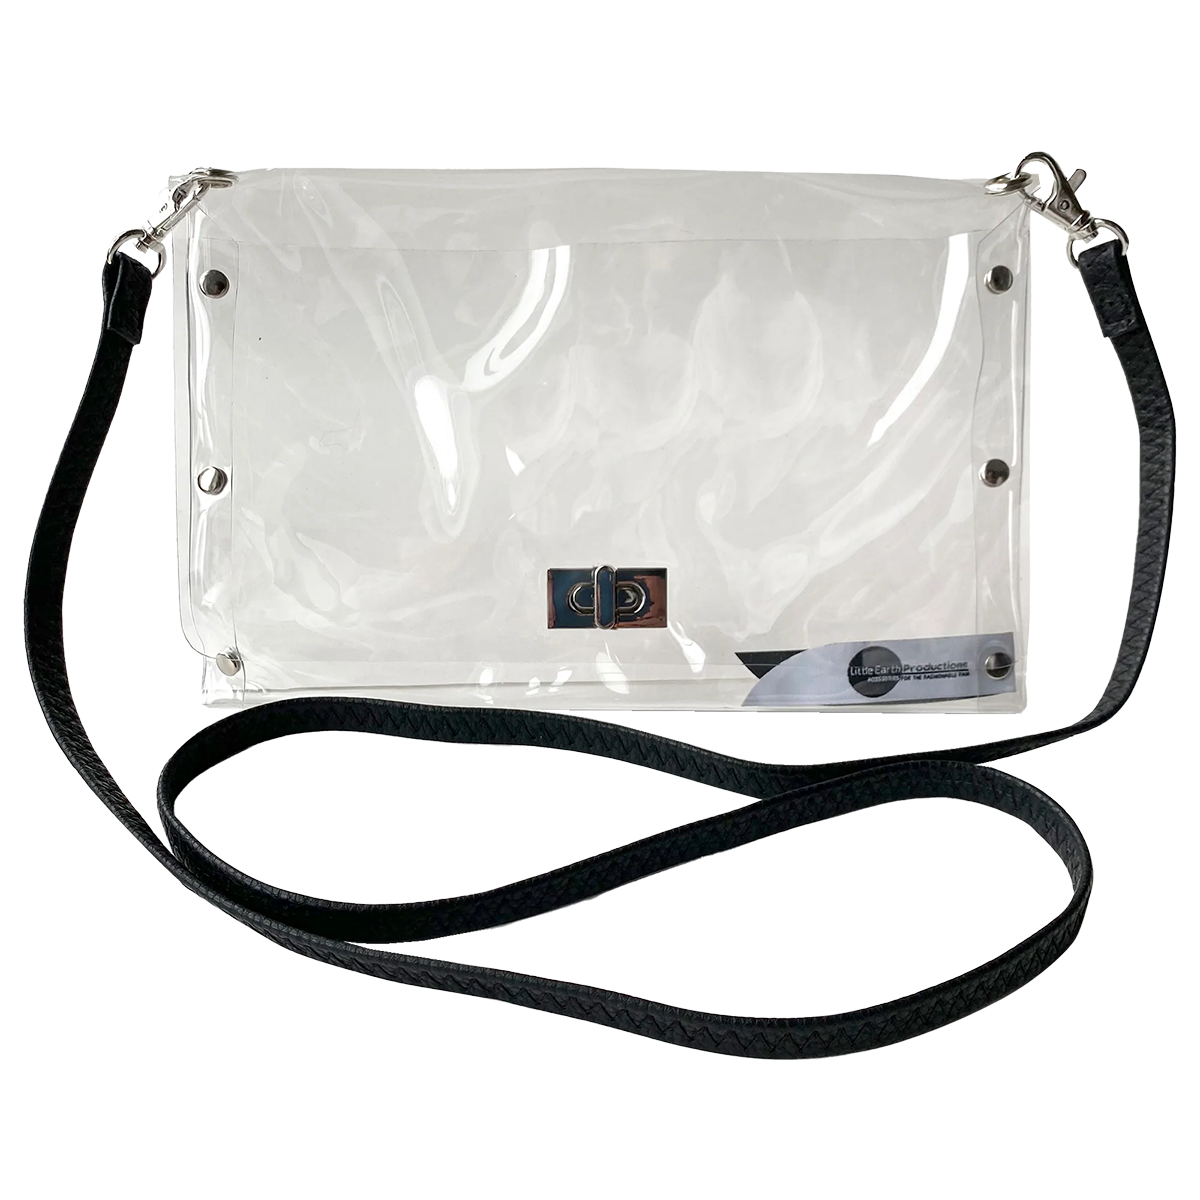 Littlearth Clear Envelope Purse with Black Fashion Strap